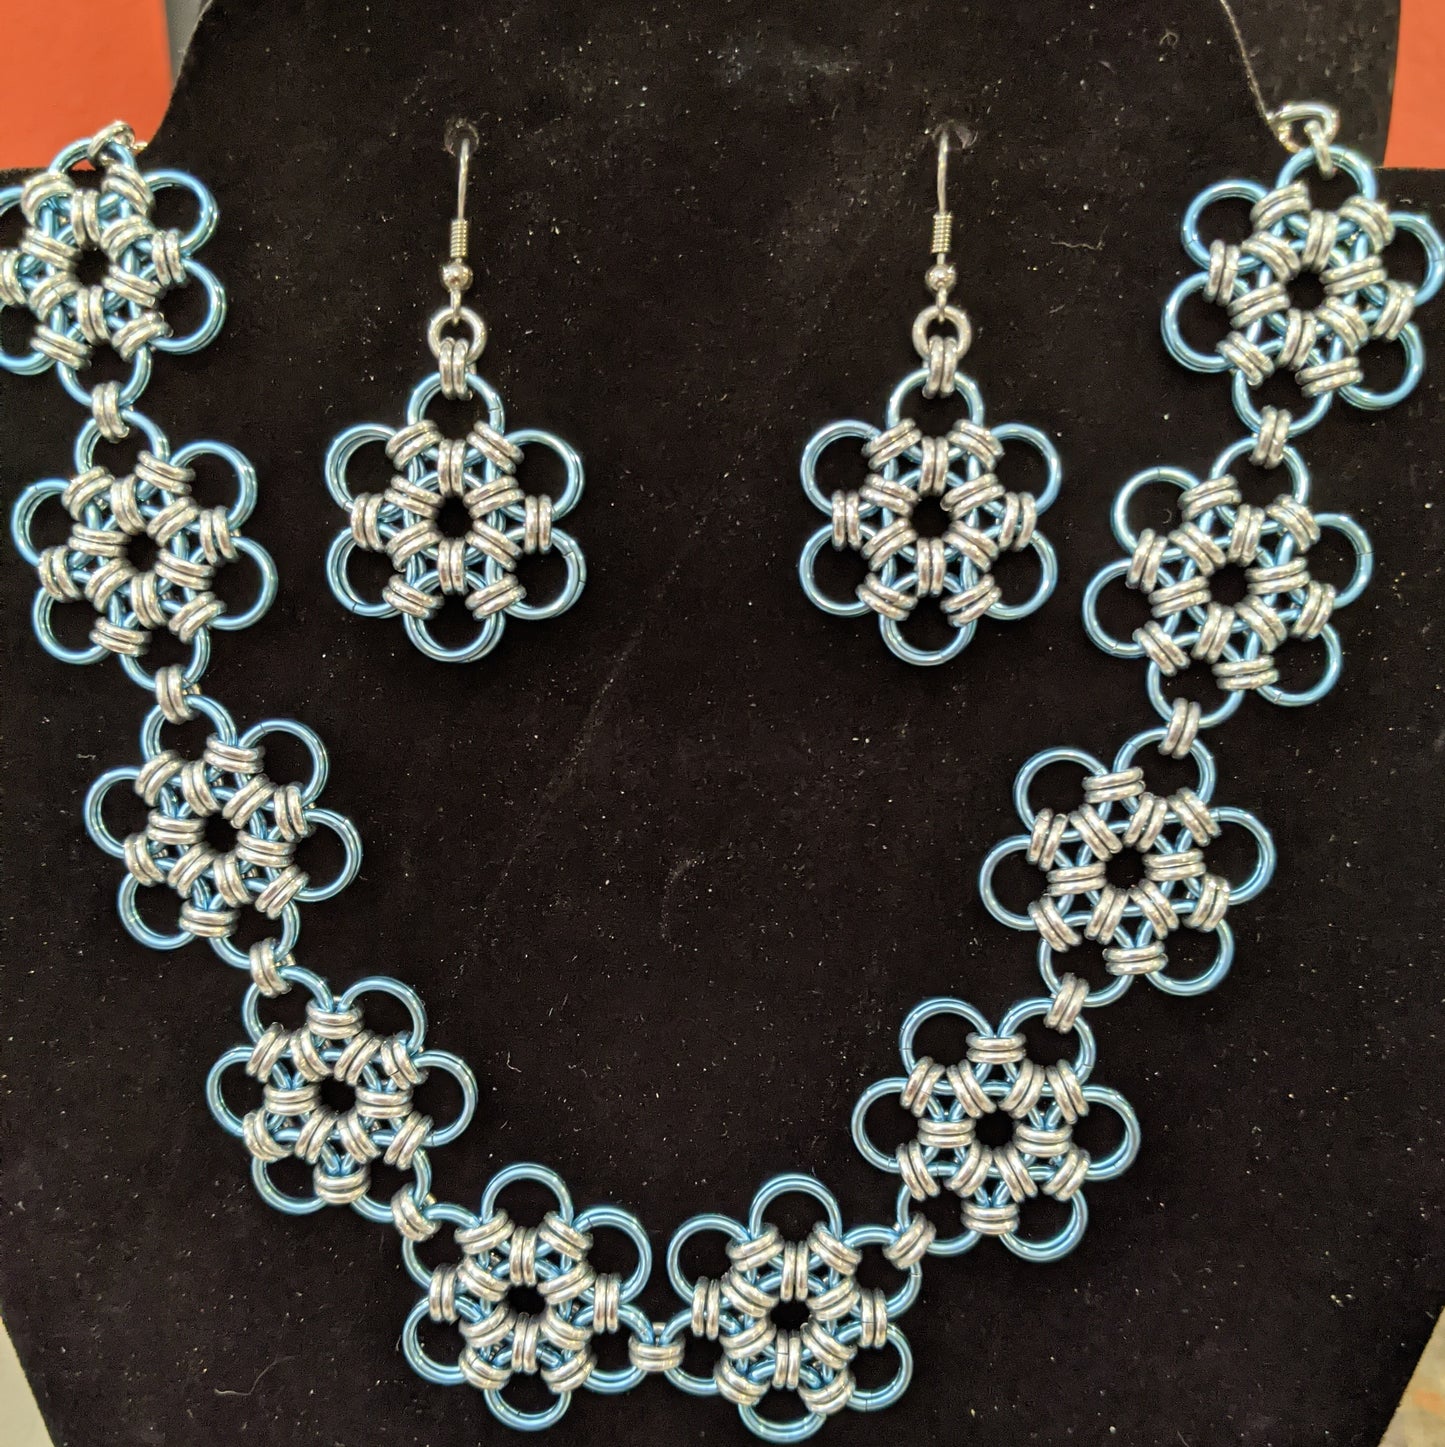 Japanese Flower Chainmail Jewelry Set Chainmail Jewelry Sets Dragon & Wolf Designs Blue and Silver  